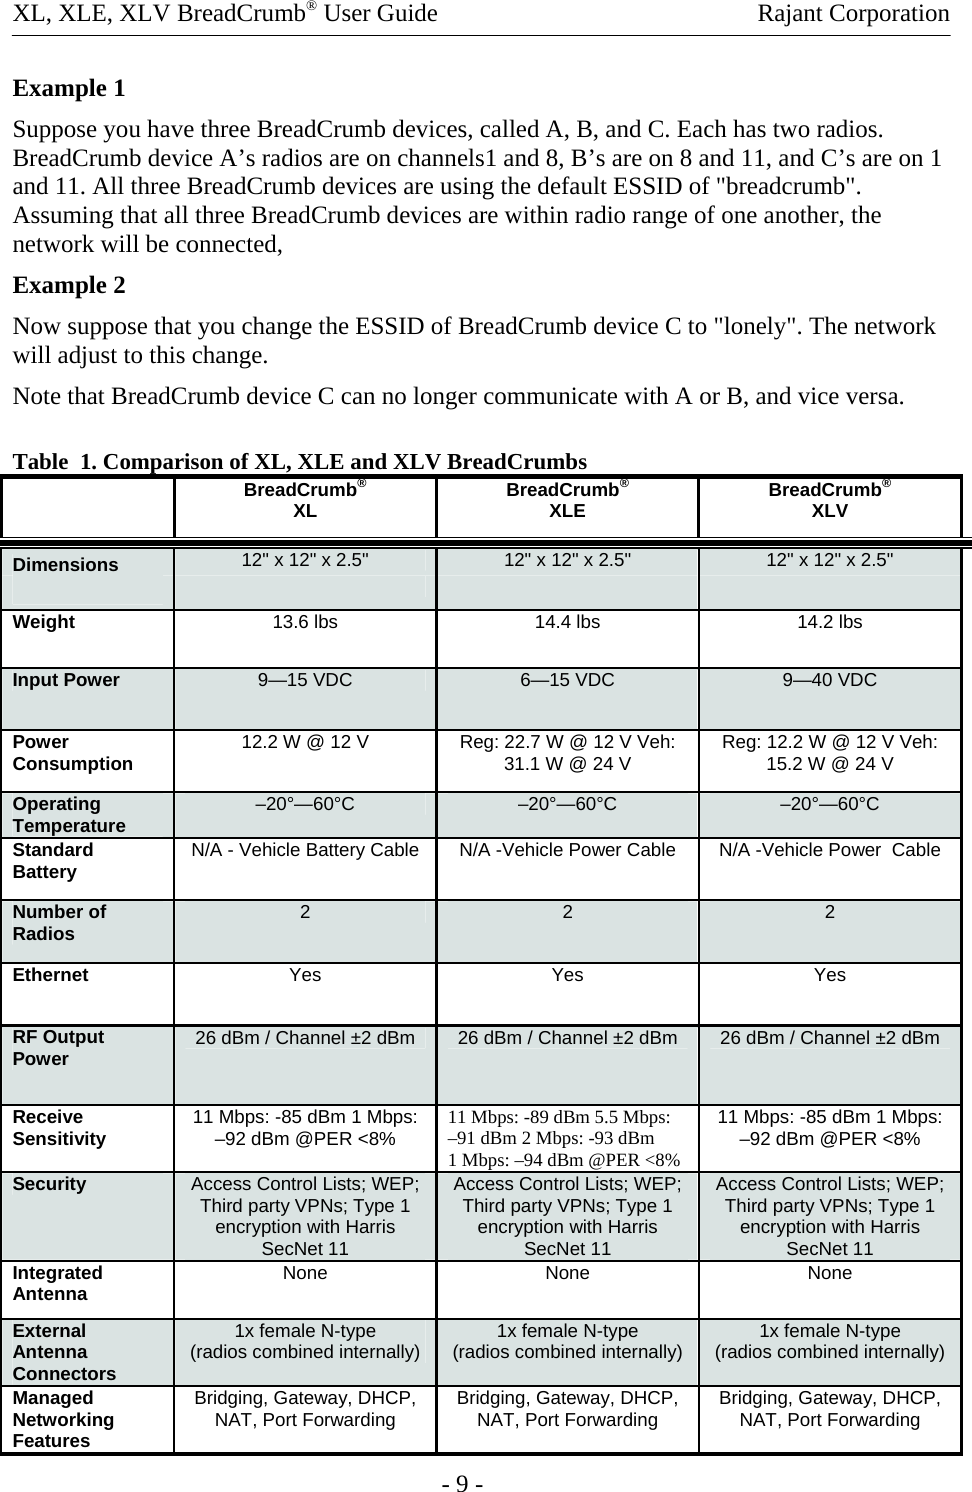 XL, XLE, XLV BreadCrumb® User Guide    Rajant Corporation     - 9 - Example 1  Suppose you have three BreadCrumb devices, called A, B, and C. Each has two radios. BreadCrumb device A’s radios are on channels1 and 8, B’s are on 8 and 11, and C’s are on 1 and 11. All three BreadCrumb devices are using the default ESSID of &quot;breadcrumb&quot;. Assuming that all three BreadCrumb devices are within radio range of one another, the network will be connected, Example 2  Now suppose that you change the ESSID of BreadCrumb device C to &quot;lonely&quot;. The network will adjust to this change. Note that BreadCrumb device C can no longer communicate with A or B, and vice versa.  Table  1. Comparison of XL, XLE and XLV BreadCrumbs   BreadCrumb®XL BreadCrumb®XLE BreadCrumb®XLV Dimensions  12&quot; x 12&quot; x 2.5&quot;  12&quot; x 12&quot; x 2.5&quot;  12&quot; x 12&quot; x 2.5&quot;     Weight  13.6 lbs   14.4 lbs   14.2 lbs  Input Power  9—15 VDC   6—15 VDC   9—40 VDC  Power Consumption  12.2 W @ 12 V   Reg: 22.7 W @ 12 V Veh: 31.1 W @ 24 V   Reg: 12.2 W @ 12 V Veh: 15.2 W @ 24 V  Operating Temperature  –20°—60°C   –20°—60°C   –20°—60°C  Standard Battery  N/A - Vehicle Battery Cable   N/A -Vehicle Power Cable   N/A -Vehicle Power  Cable  Number of Radios  2   2   2  Ethernet  Yes   Yes   Yes  RF Output Power  26 dBm / Channel ±2 dBm  26 dBm / Channel ±2 dBm   26 dBm / Channel ±2 dBm  Receive Sensitivity  11 Mbps: -85 dBm 1 Mbps: –92 dBm @PER &lt;8%   11 Mbps: -89 dBm 5.5 Mbps:  –91 dBm 2 Mbps: -93 dBm   1 Mbps: –94 dBm @PER &lt;8%  11 Mbps: -85 dBm 1 Mbps: –92 dBm @PER &lt;8%  Security  Access Control Lists; WEP; Third party VPNs; Type 1 encryption with Harris SecNet 11  Access Control Lists; WEP; Third party VPNs; Type 1 encryption with Harris SecNet 11  Access Control Lists; WEP; Third party VPNs; Type 1 encryption with Harris SecNet 11  Integrated Antenna  None   None   None  External Antenna Connectors  1x female N-type  (radios combined internally)  1x female N-type  (radios combined internally)  1x female N-type  (radios combined internally) Managed Networking Features  Bridging, Gateway, DHCP, NAT, Port Forwarding   Bridging, Gateway, DHCP, NAT, Port Forwarding   Bridging, Gateway, DHCP, NAT, Port Forwarding  